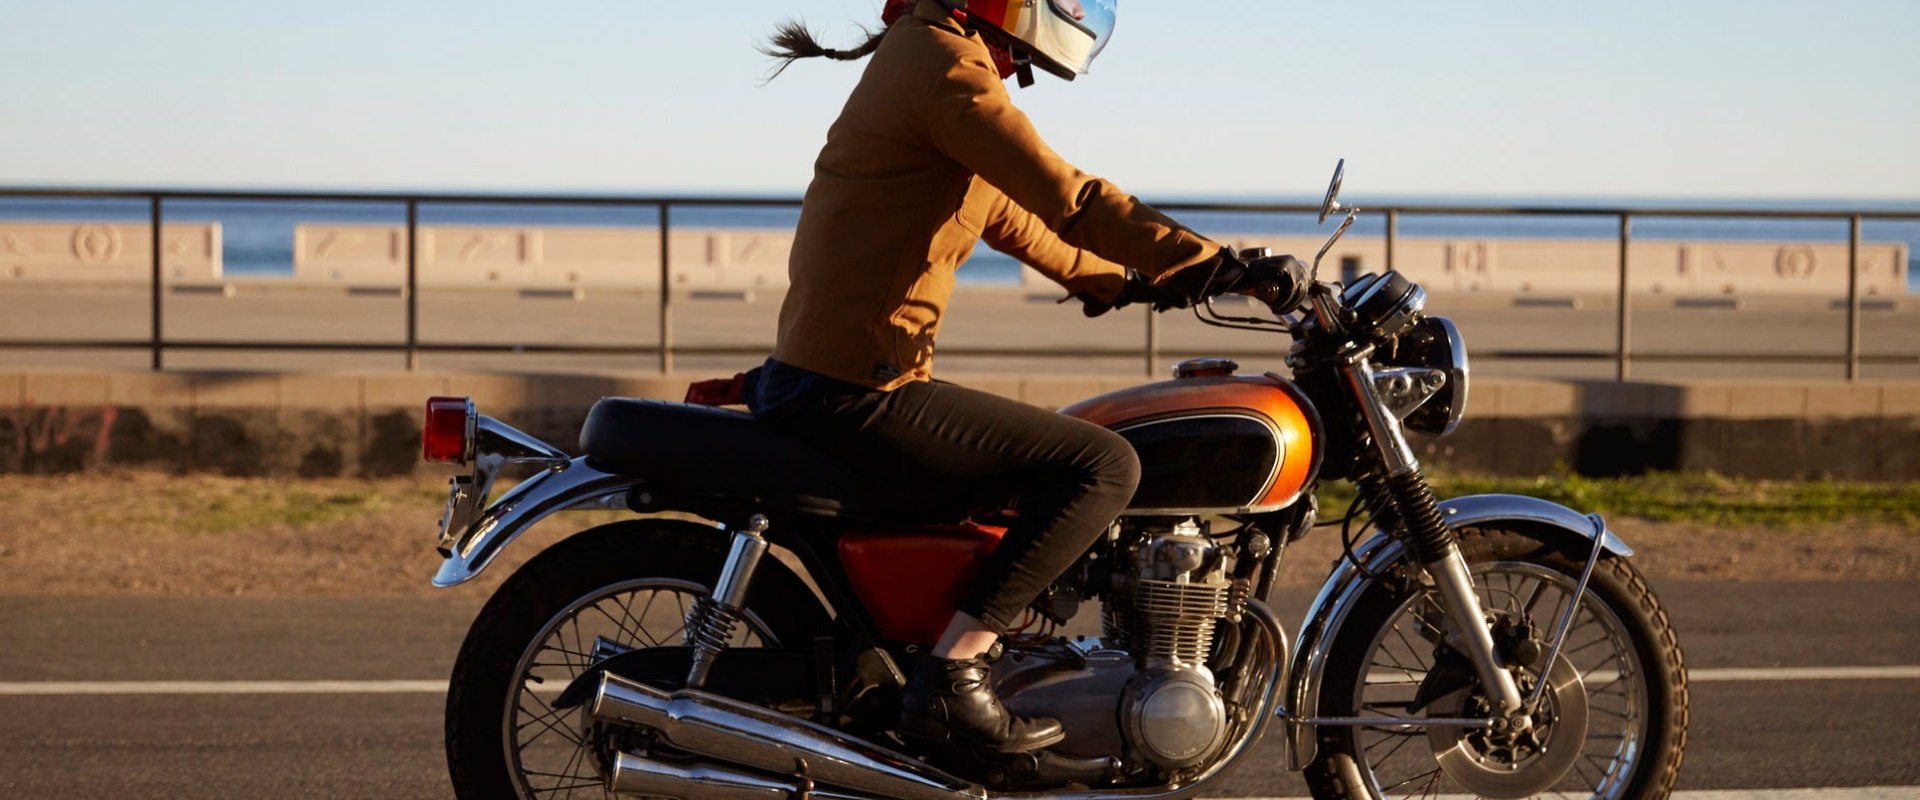 Autocycle Insurance for Vintage Motorcycles